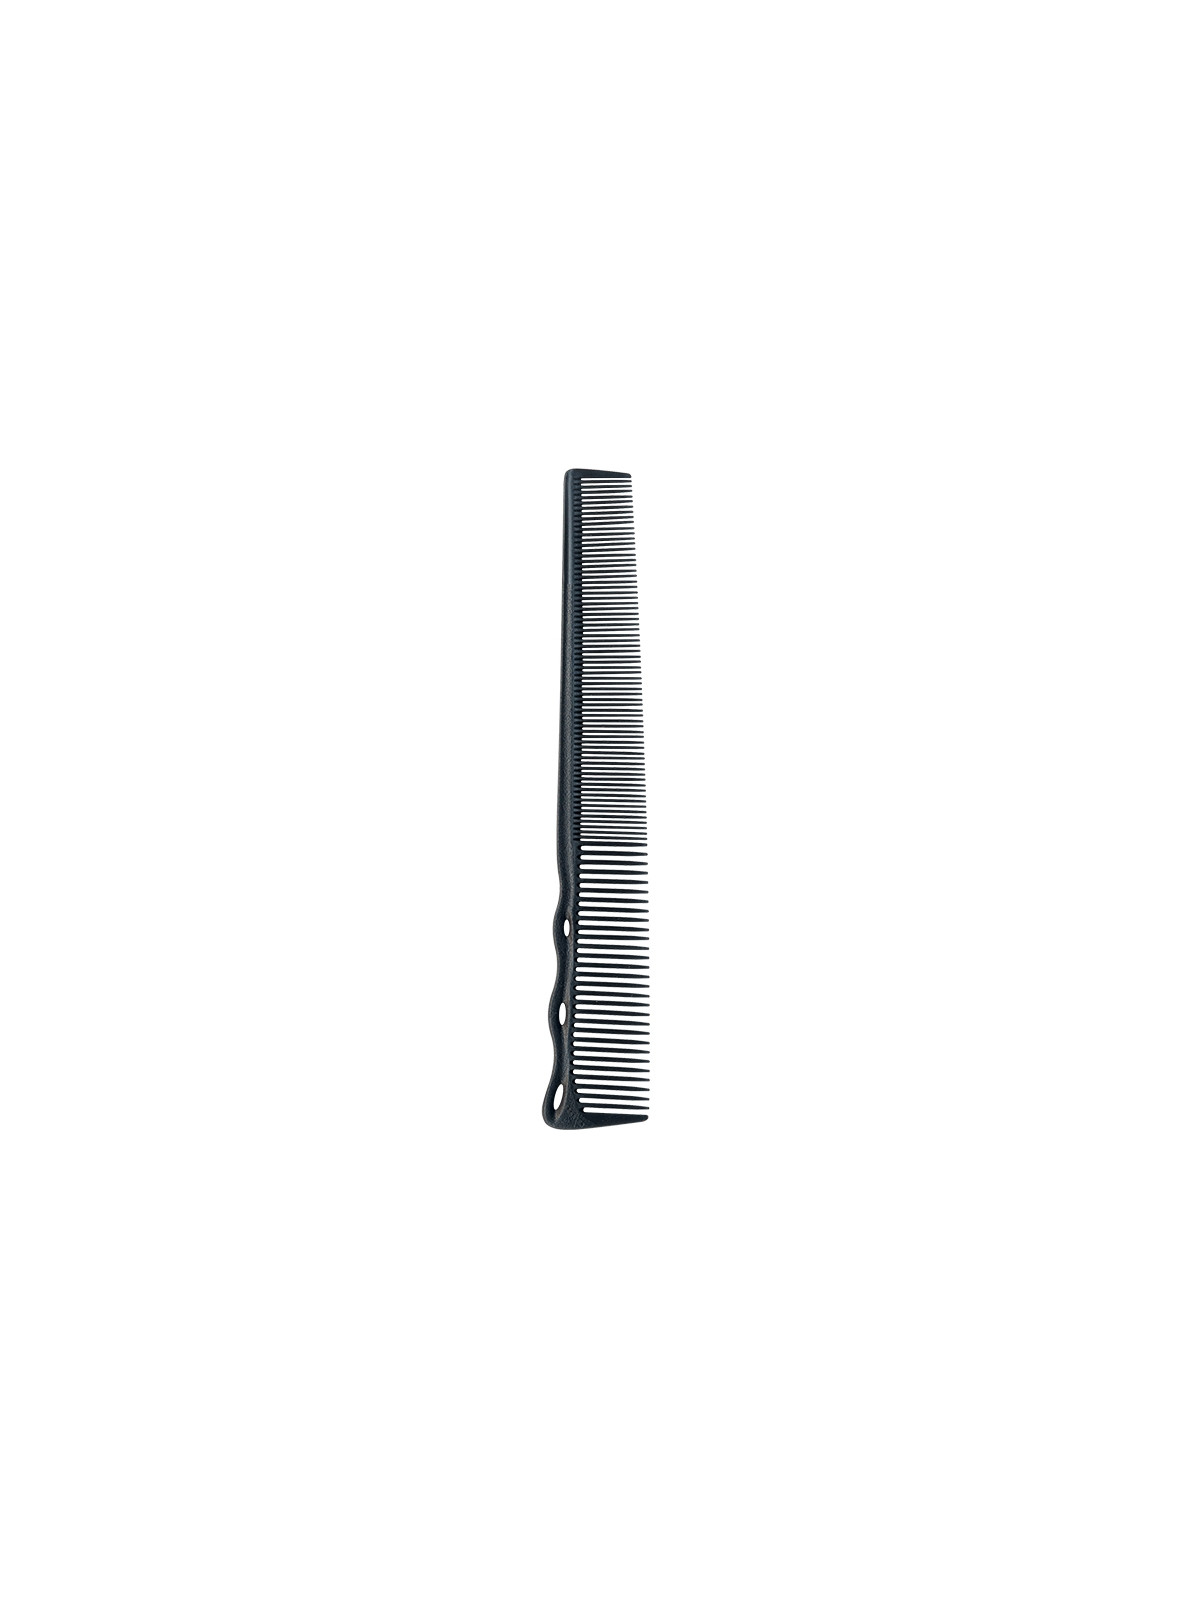 Y.S. Park 252 Tapered Flexible Cutting Comb 167mm